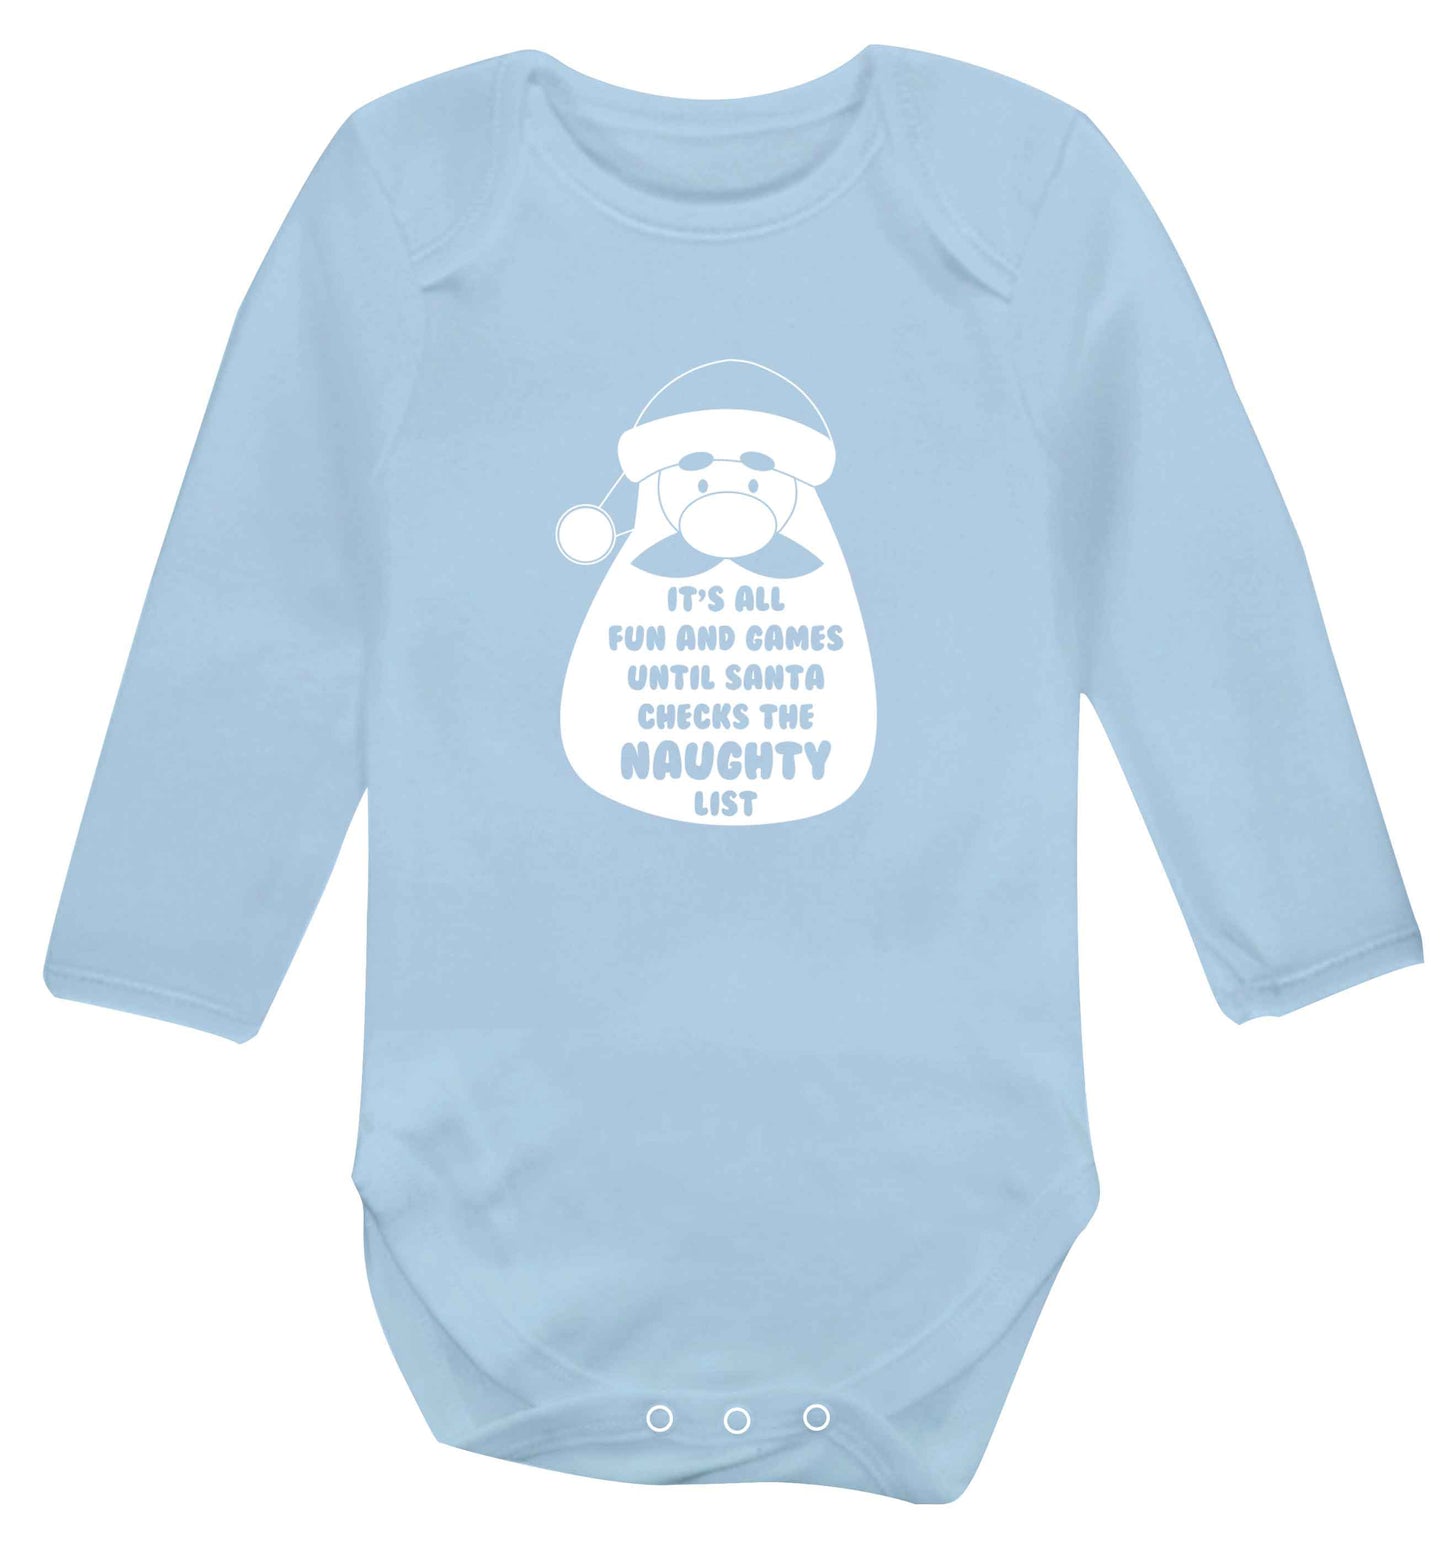 It's all fun and games until Santa checks the naughty list baby vest long sleeved pale blue 6-12 months